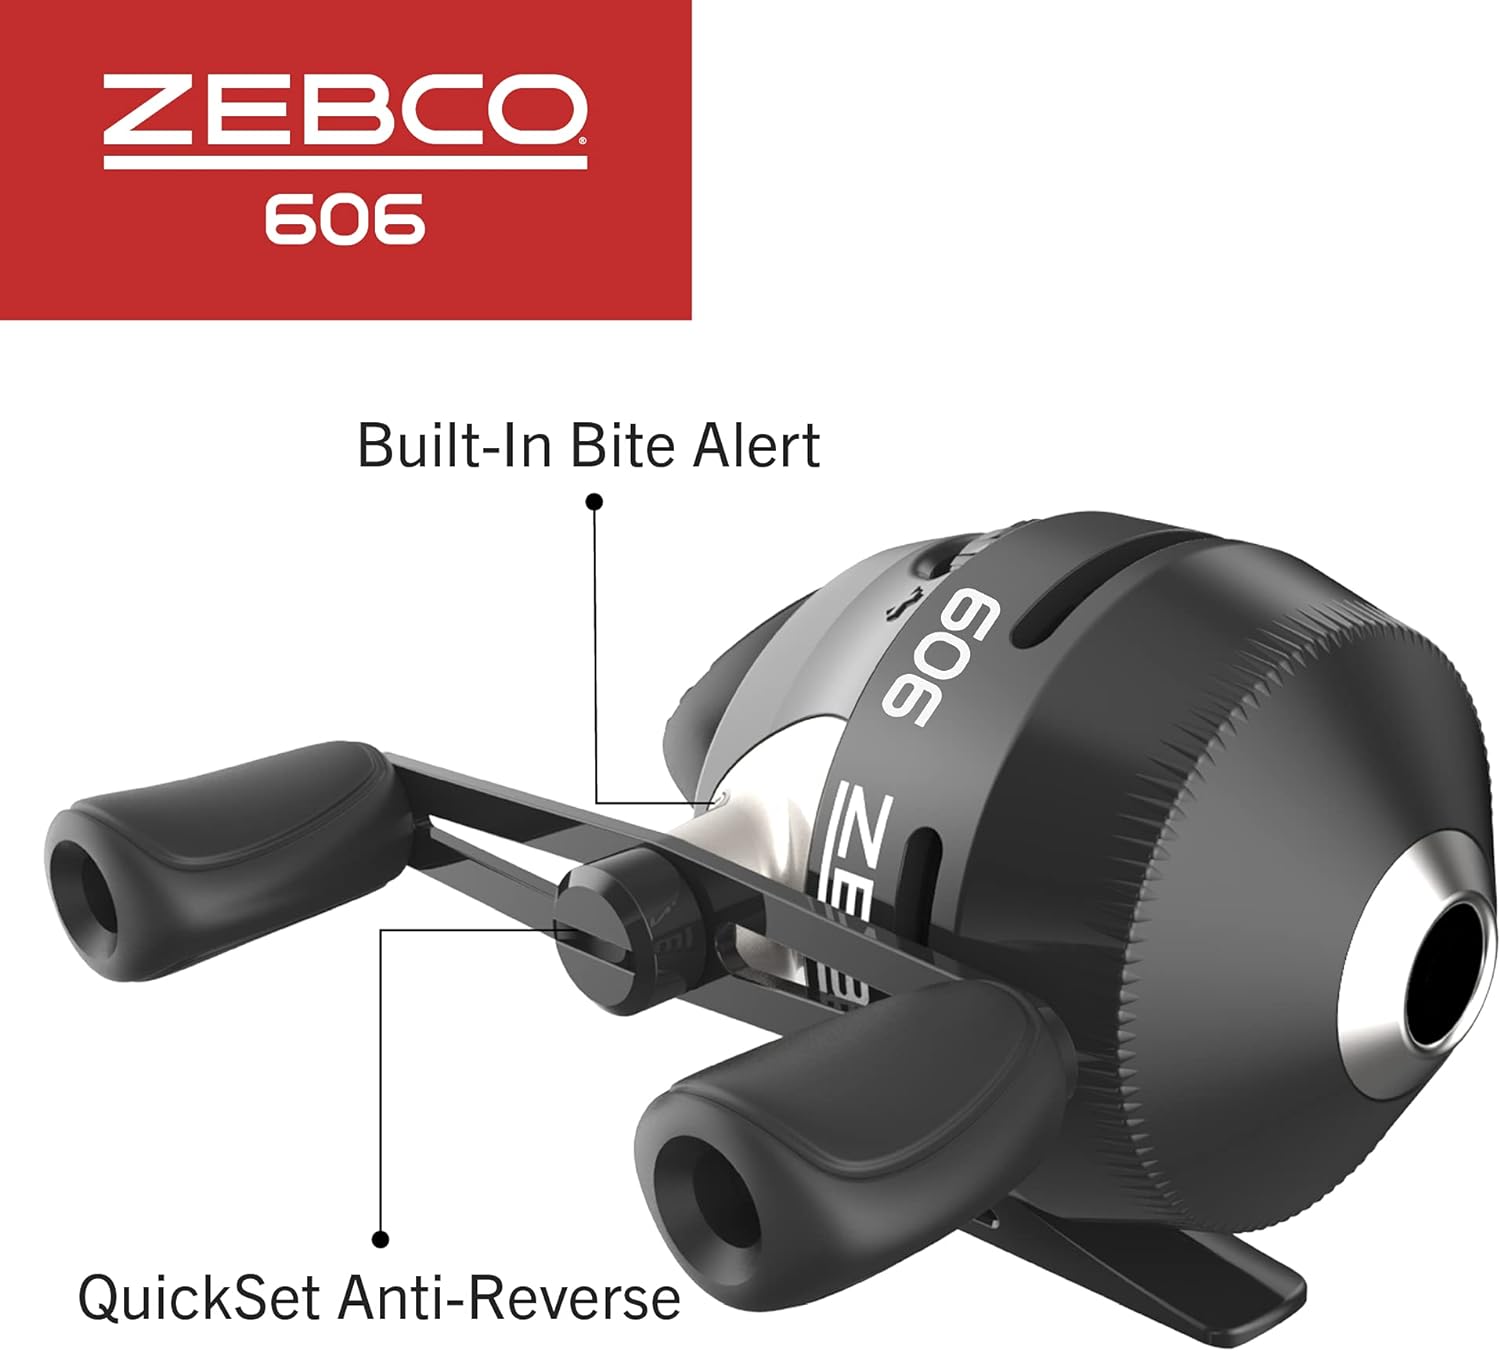 Zebco 606 Spincast Fishing Reel, Size 60 Reel, Right-Hand Retrieve, Pre-Spooled With 20-Pound Zebco Fishing Line, Quickset Anti-Reverse And Dial-Adjustable Drag, Black, Clam Packaging